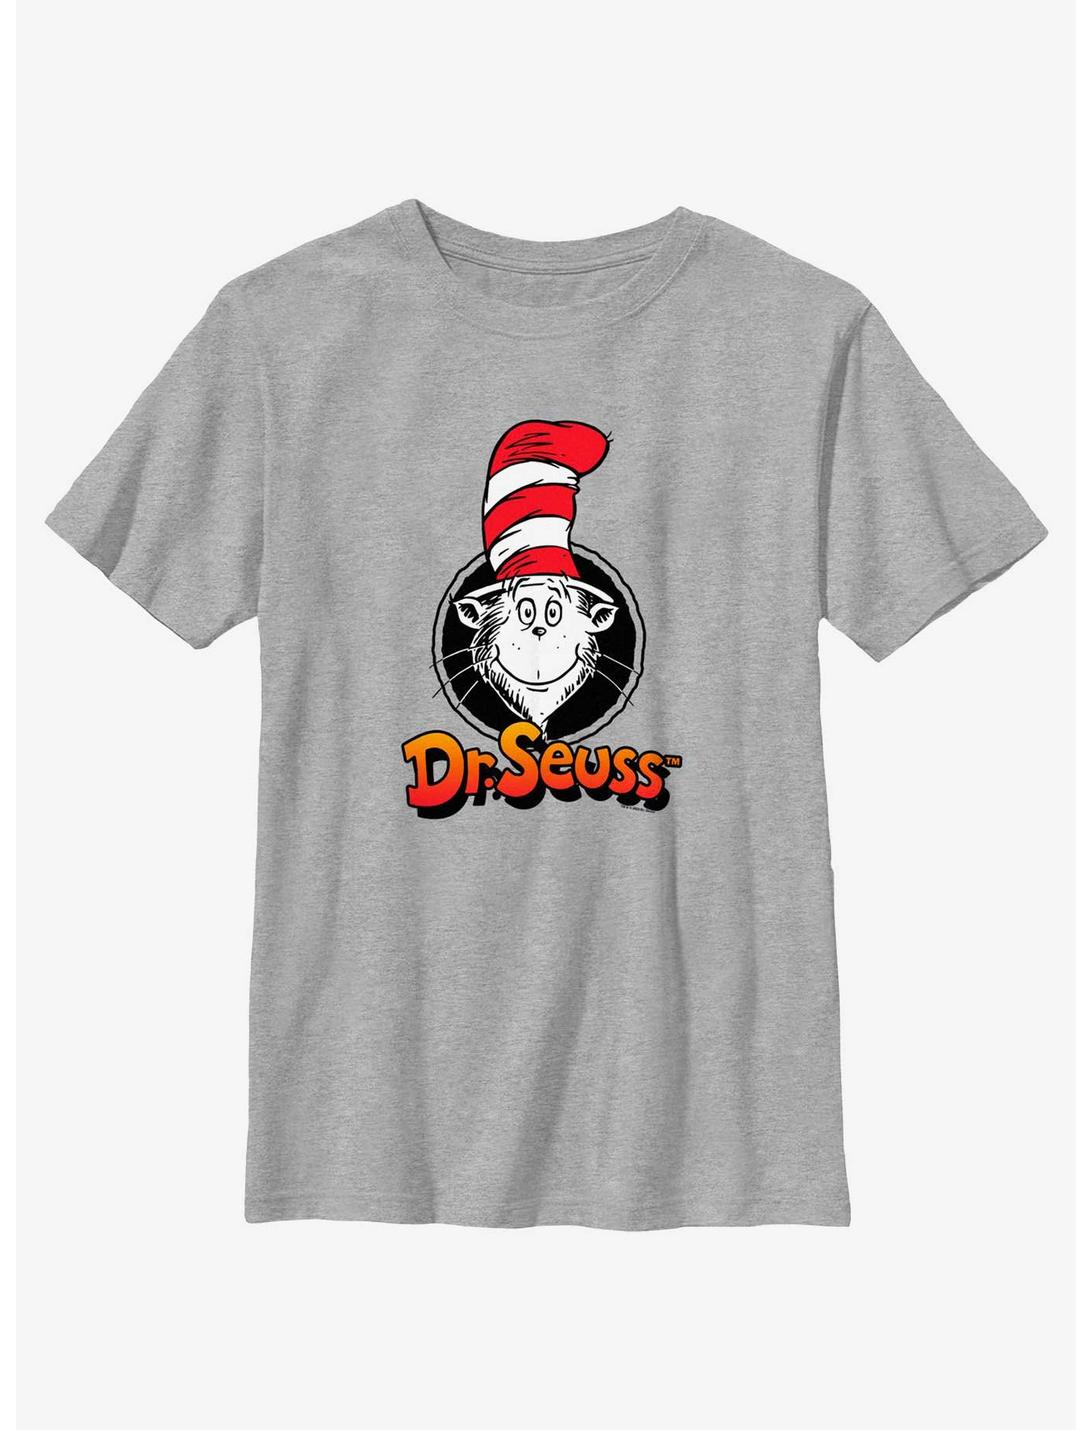 Dr. Seuss's Cat In The Hat Circle Portrait Youth T-Shirt, ATH HTR, hi-res